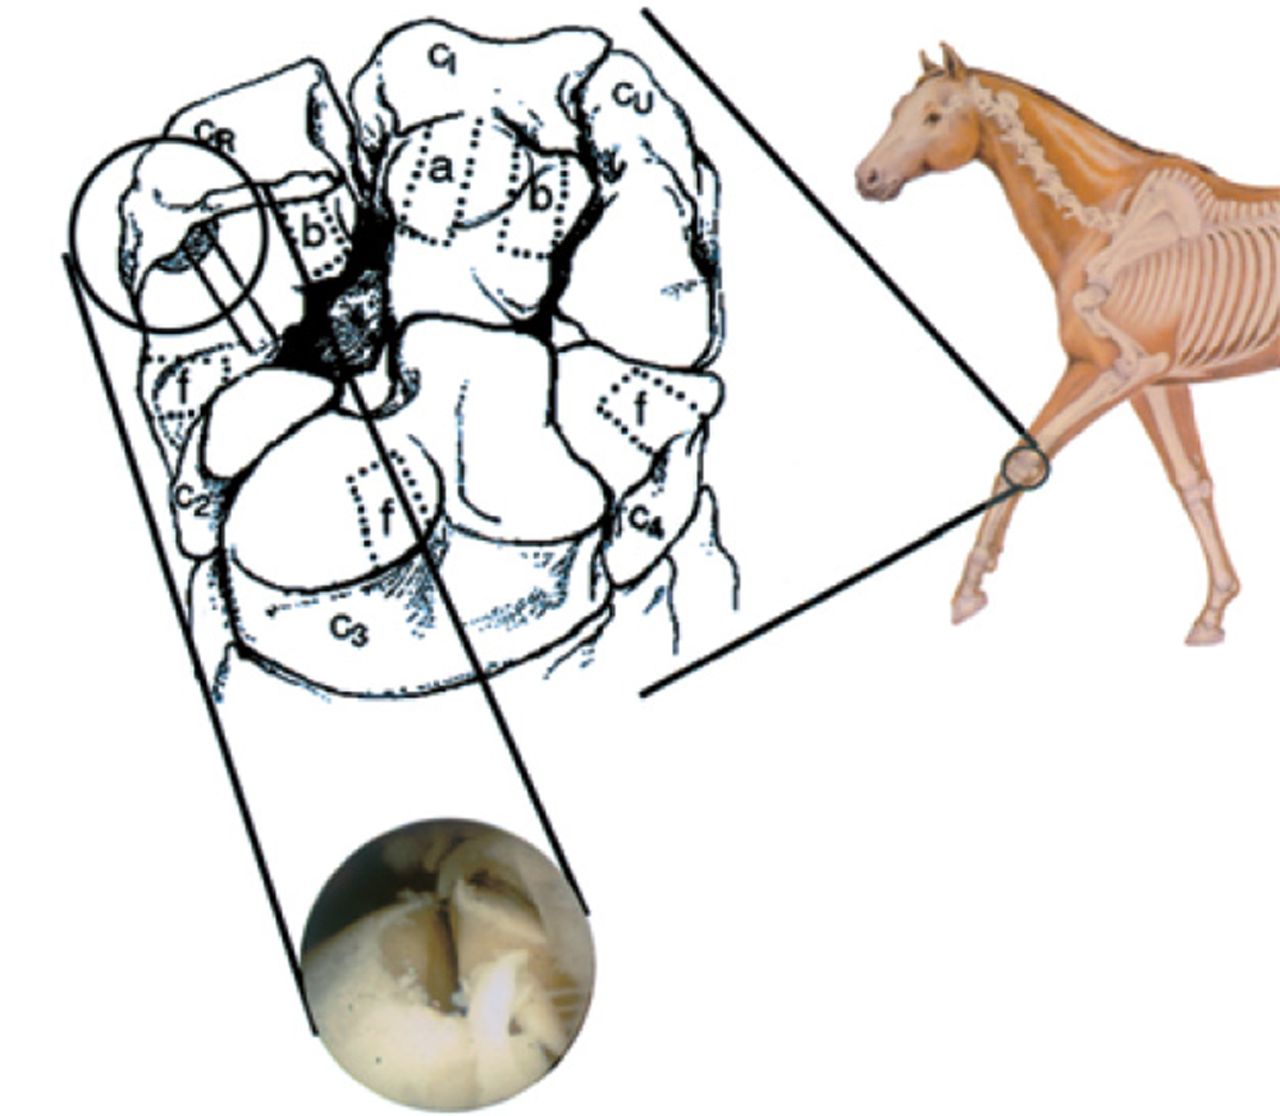 Fig. 5 
          Image showing the dorsal view of the
equine middle carpal joint depicting areas of specific tissue sampling
and the osteochondral fragment: a) an area from which articular
cartilage was harvested for estimation of proteoglycan synthesis,
b) areas from which articular cartilage was harvested for analysis
of glycosaminoglycan content, and f) areas from which articular
cartilage was harvested for histopathology. The filled in area in
the radial carpal bone (CR, circled) represents the osteochondral
fragment and the solid lines running through this region represent the
section of bone harvested for routine histopathology. The arthroscopic
image shows the radial carpal bone after fragment creation and bone debridement
(CI, intermediate carpal bone; CU, ulnar carpal bone;
C2, second carpal bone; C3, third carpal bone;
C4, fourth carpal bone) (reproduced with permission from Frisbie
DD et al. Treatment of experimental equine osteoarthritis
by in vivo delivery of the equine interleukin-1 receptor antagonist
gene. Gene Therapy 2002;9:12–20).
        